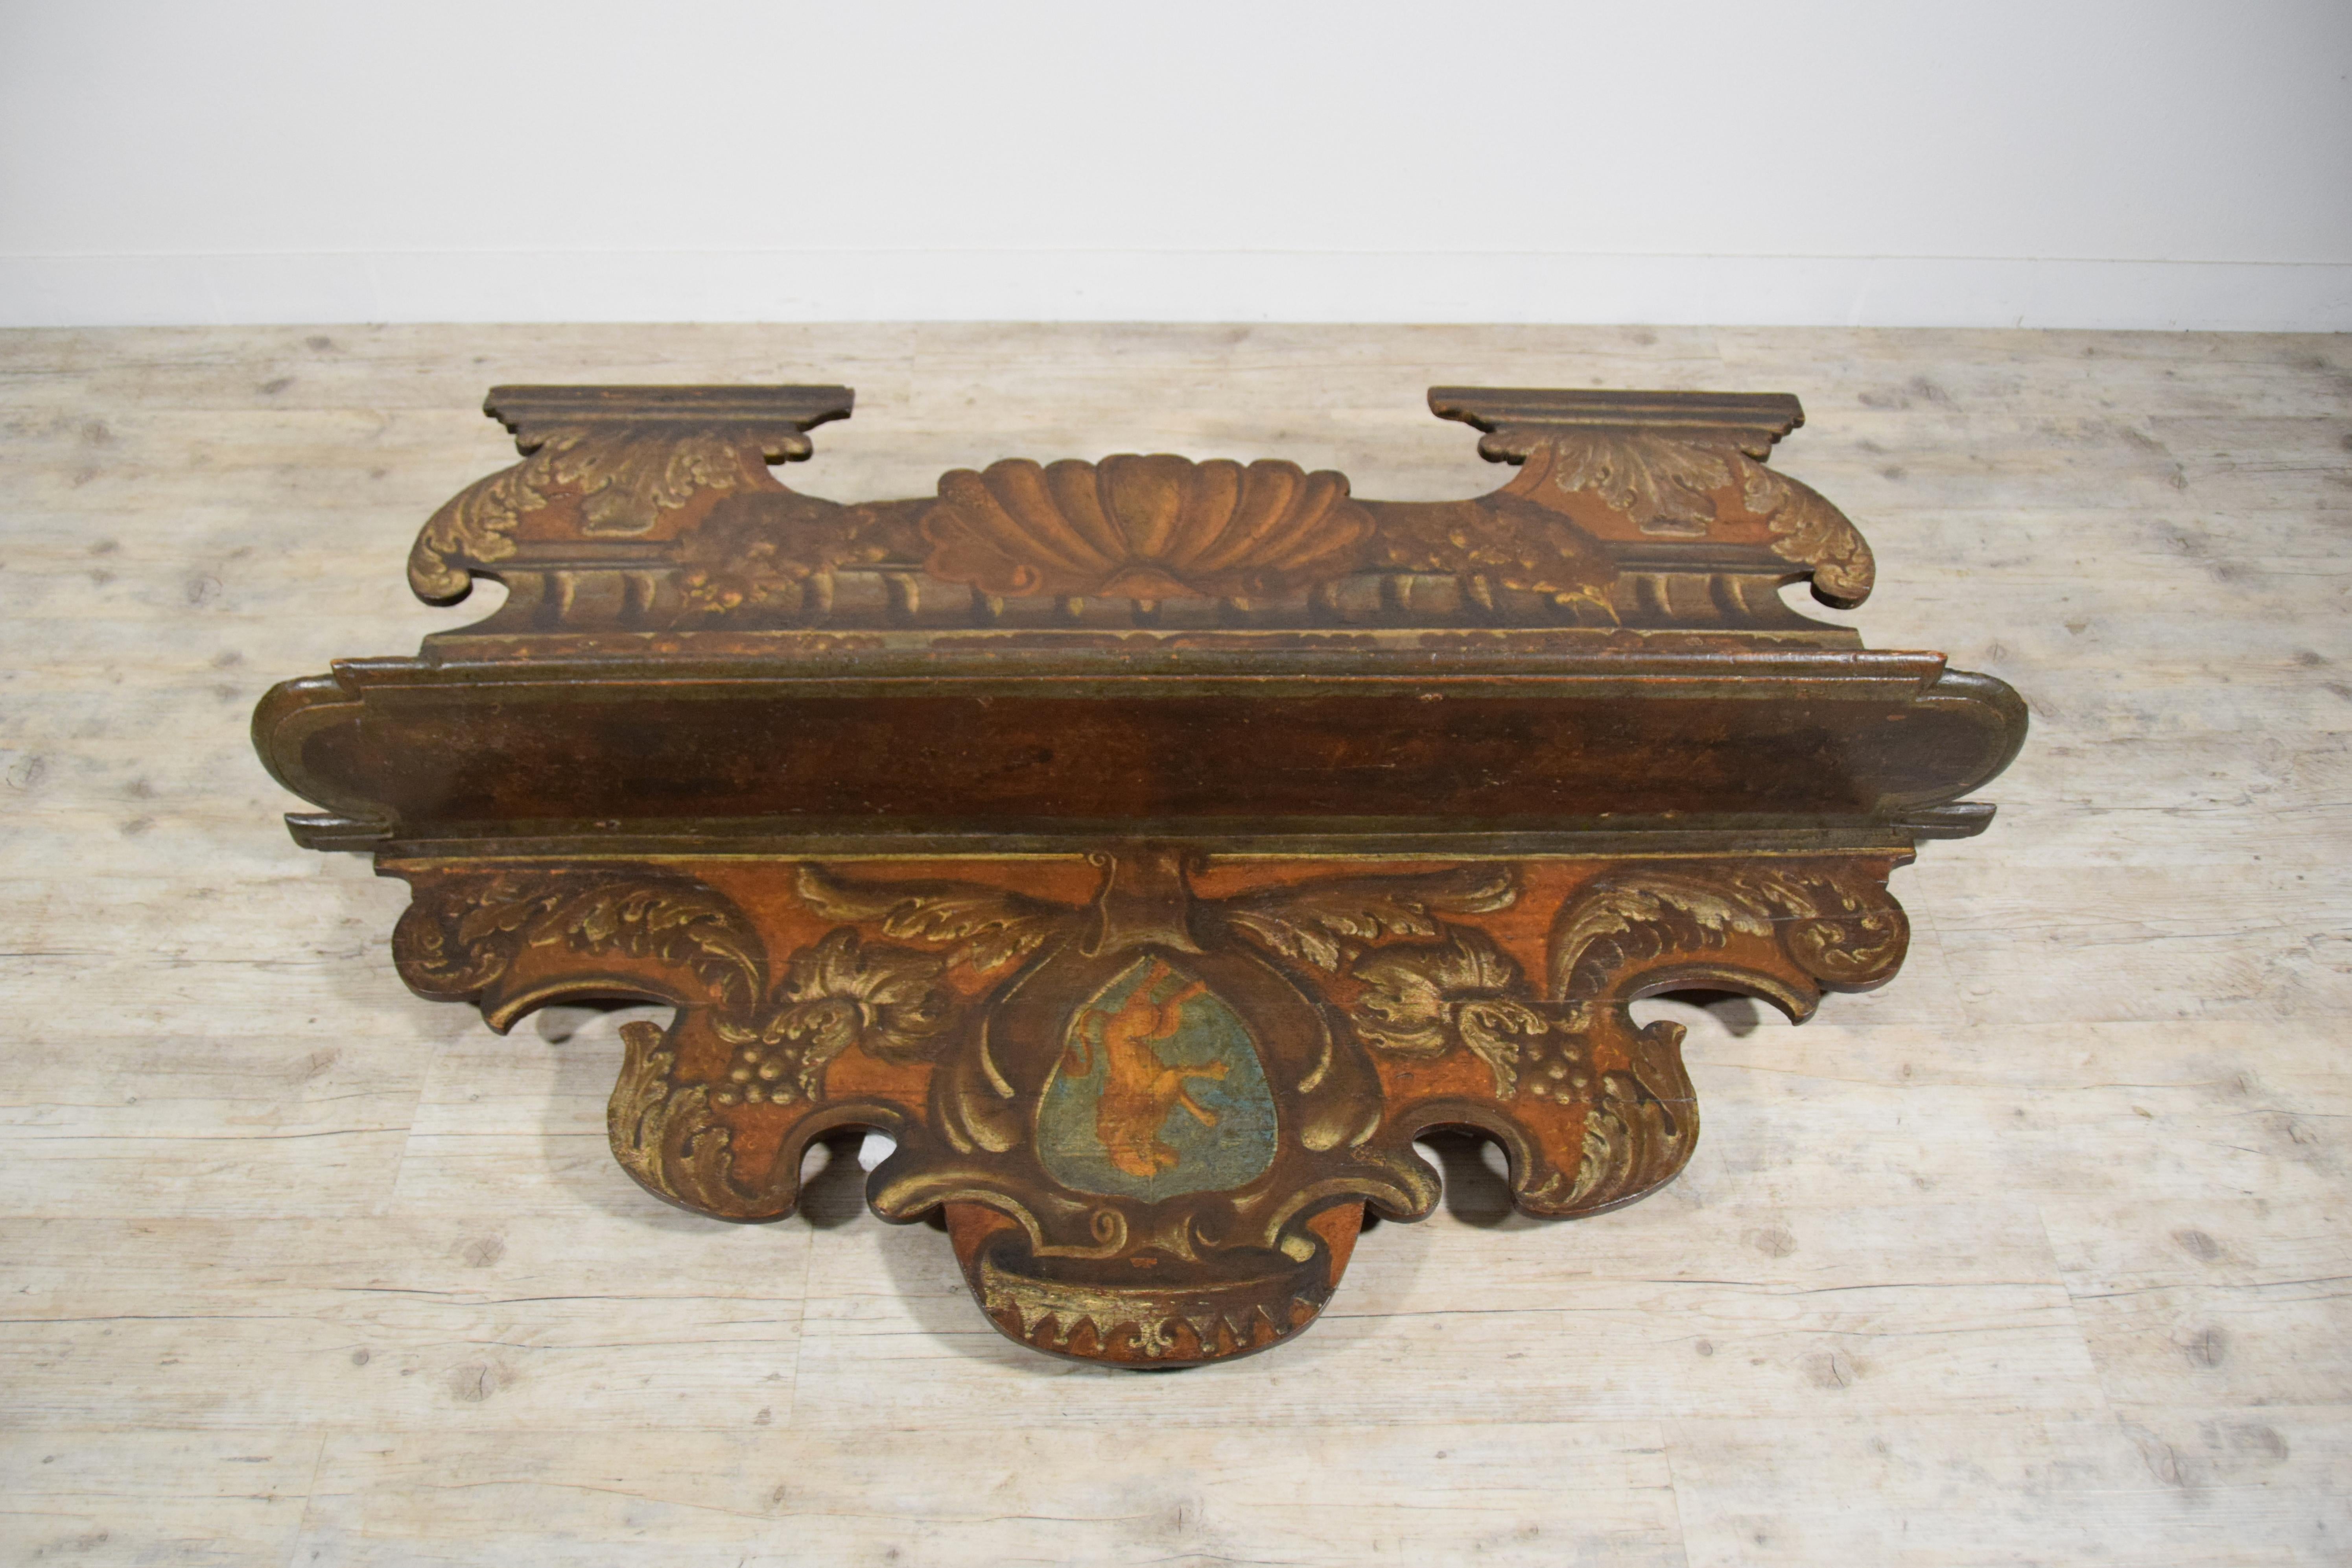 17th century, Italian Baroque Lacquered Wood Bench  15